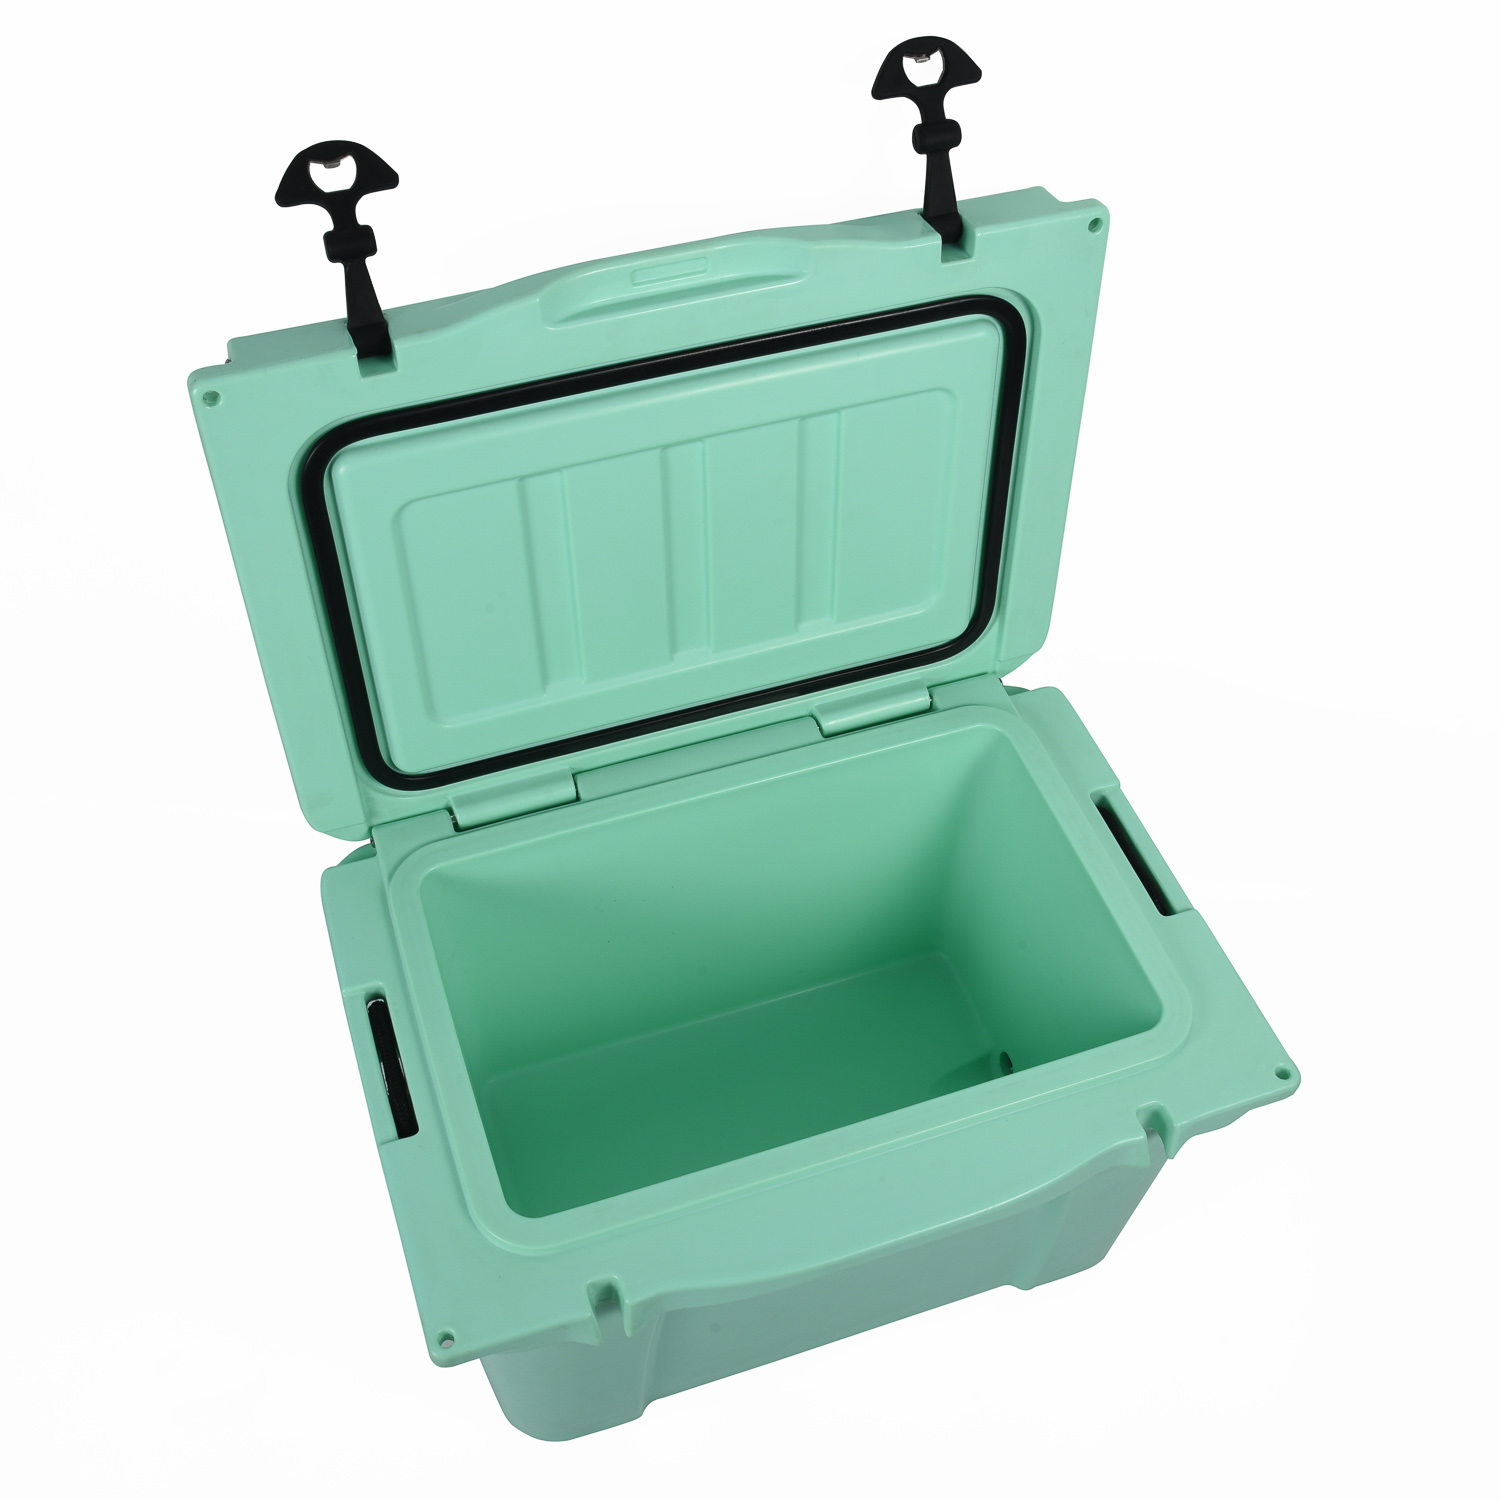 New Fishing Ice Cooler Box Insulated Coolers 35L for Camping